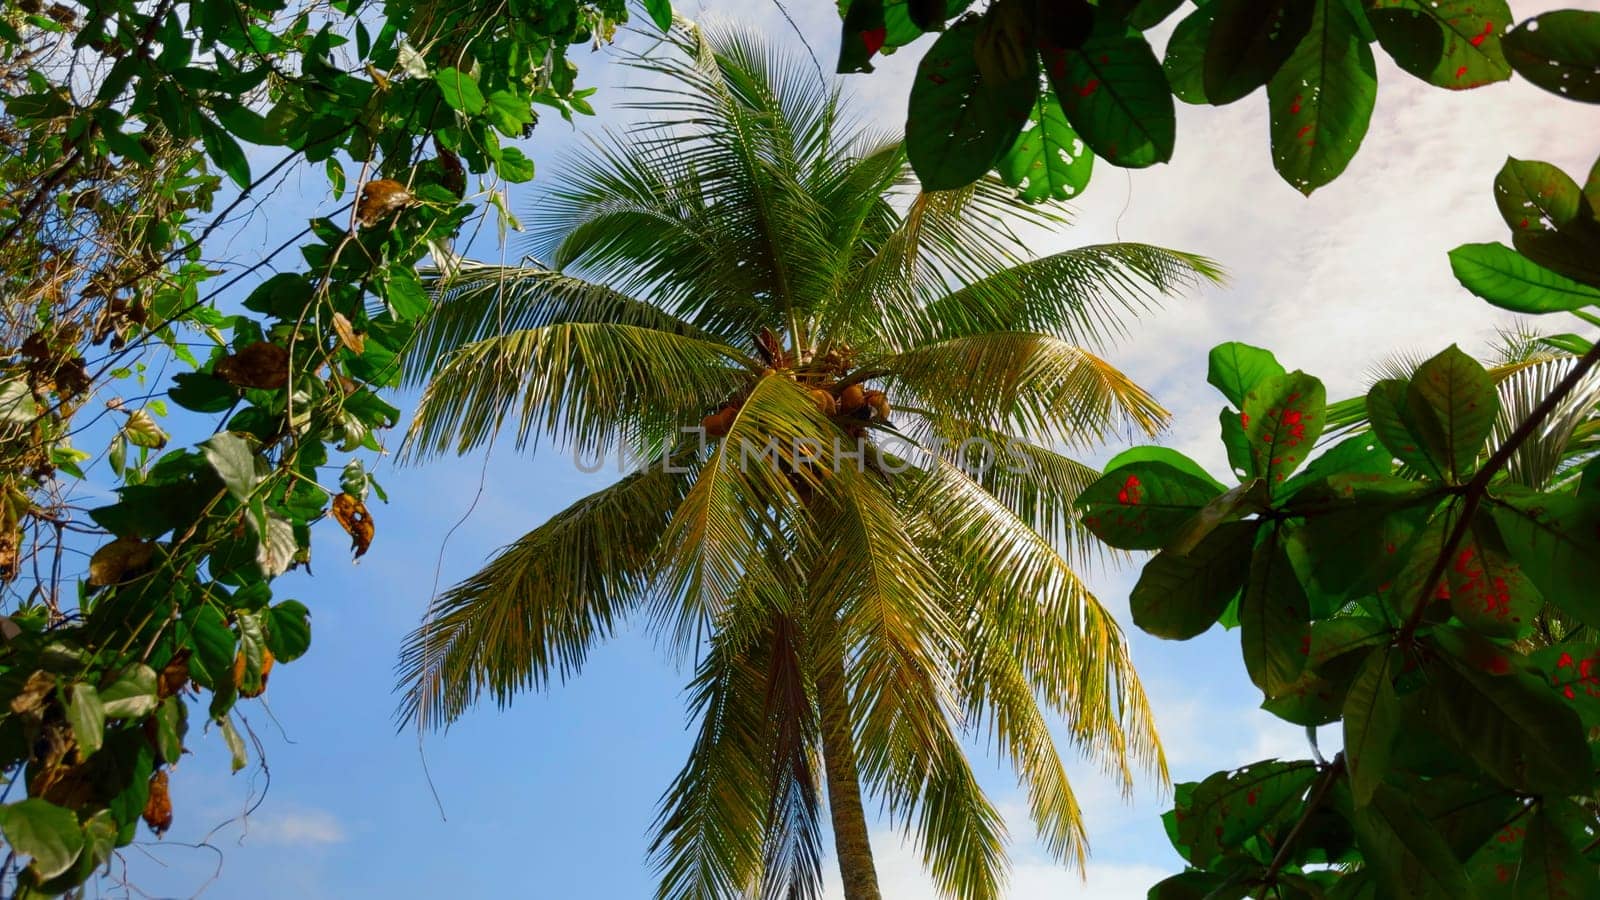 Palm trees in tropical jungle forest in a sunny day. Action. Green fresh leaves swaying in the wind